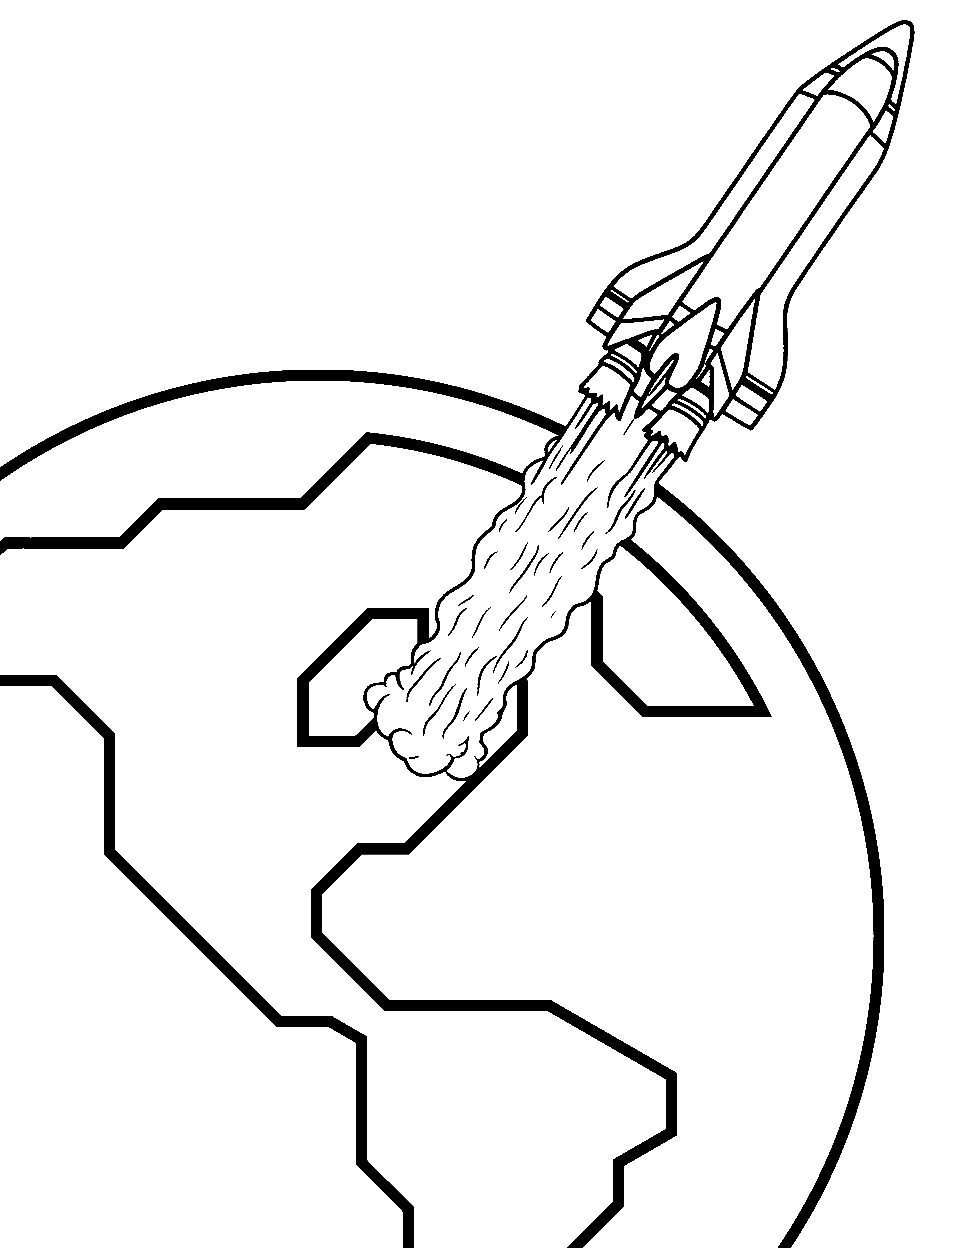 Realistic Rocket Launch Coloring Page - Detailed view of a rocket taking off from Earth.